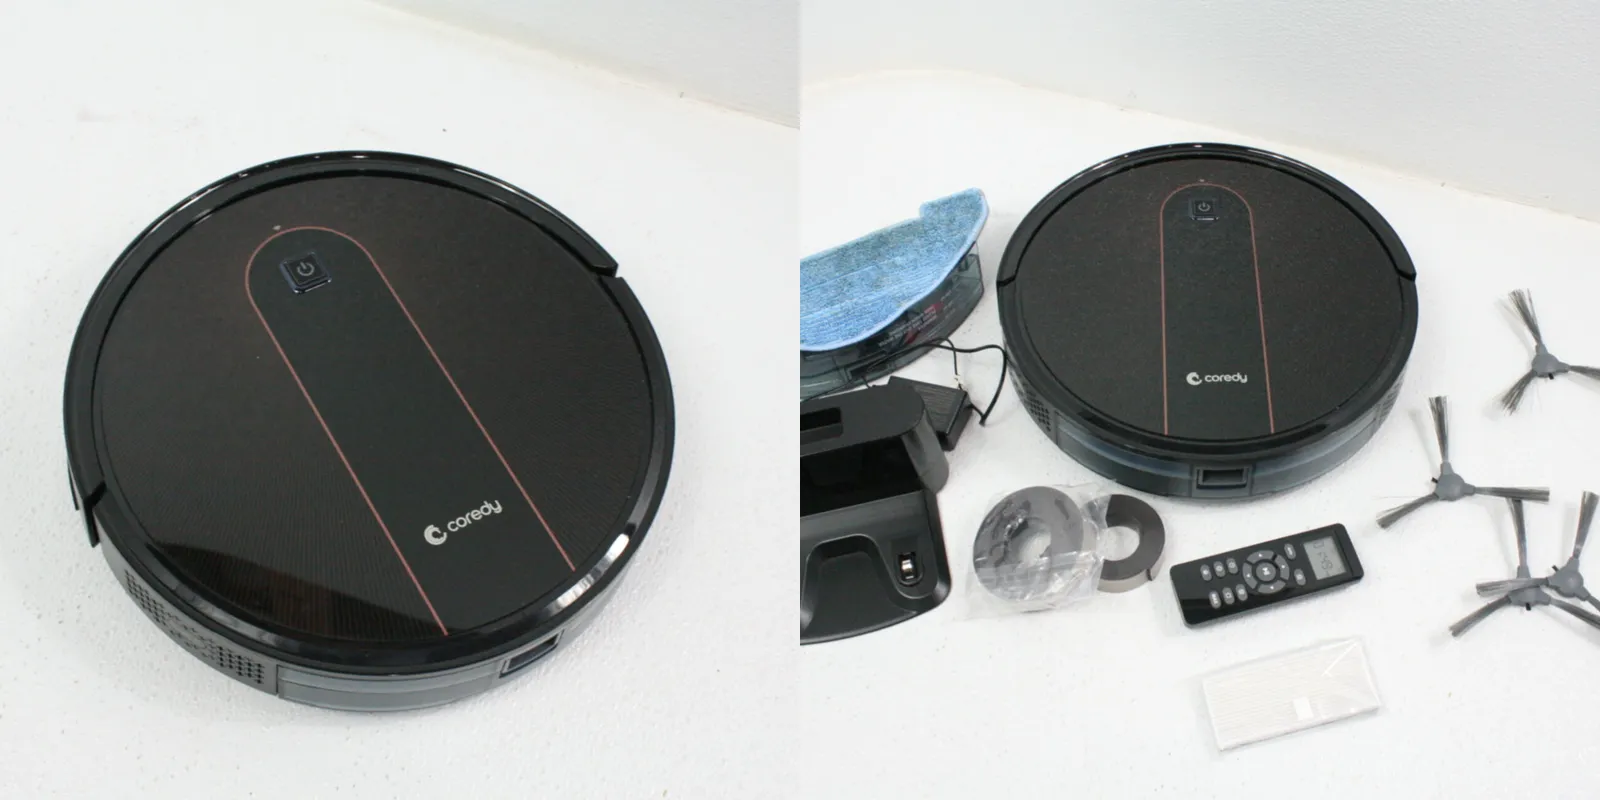 Coredy R750 Robot Vacuum Cleaner Review: Is it worth the money?